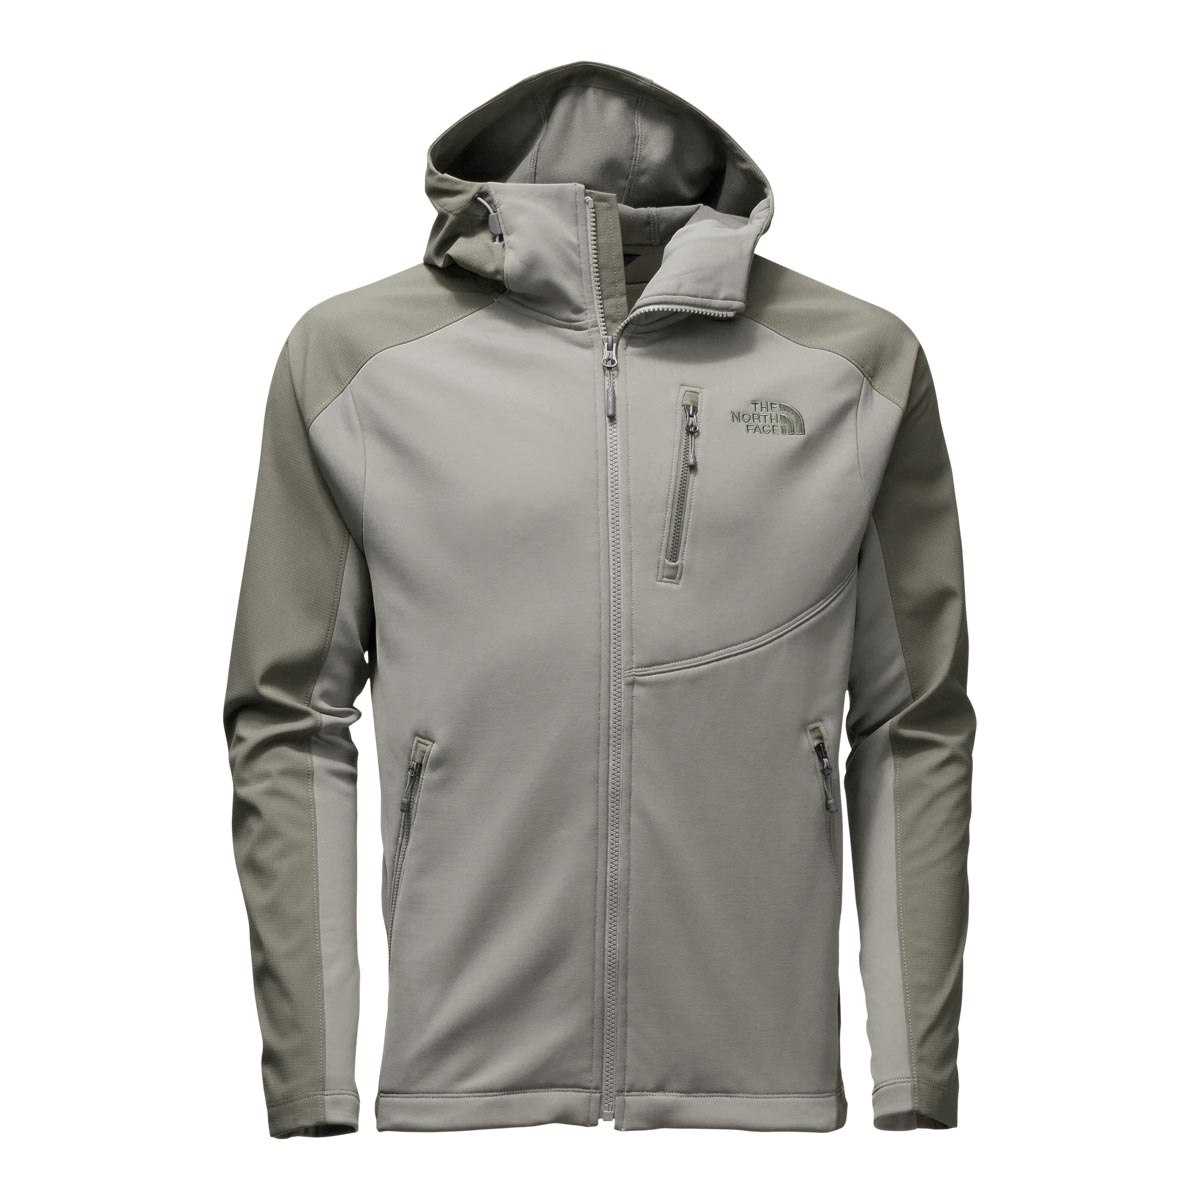 The North Face Men's Tenacious Hybrid Hoodie Discontinued Pricing